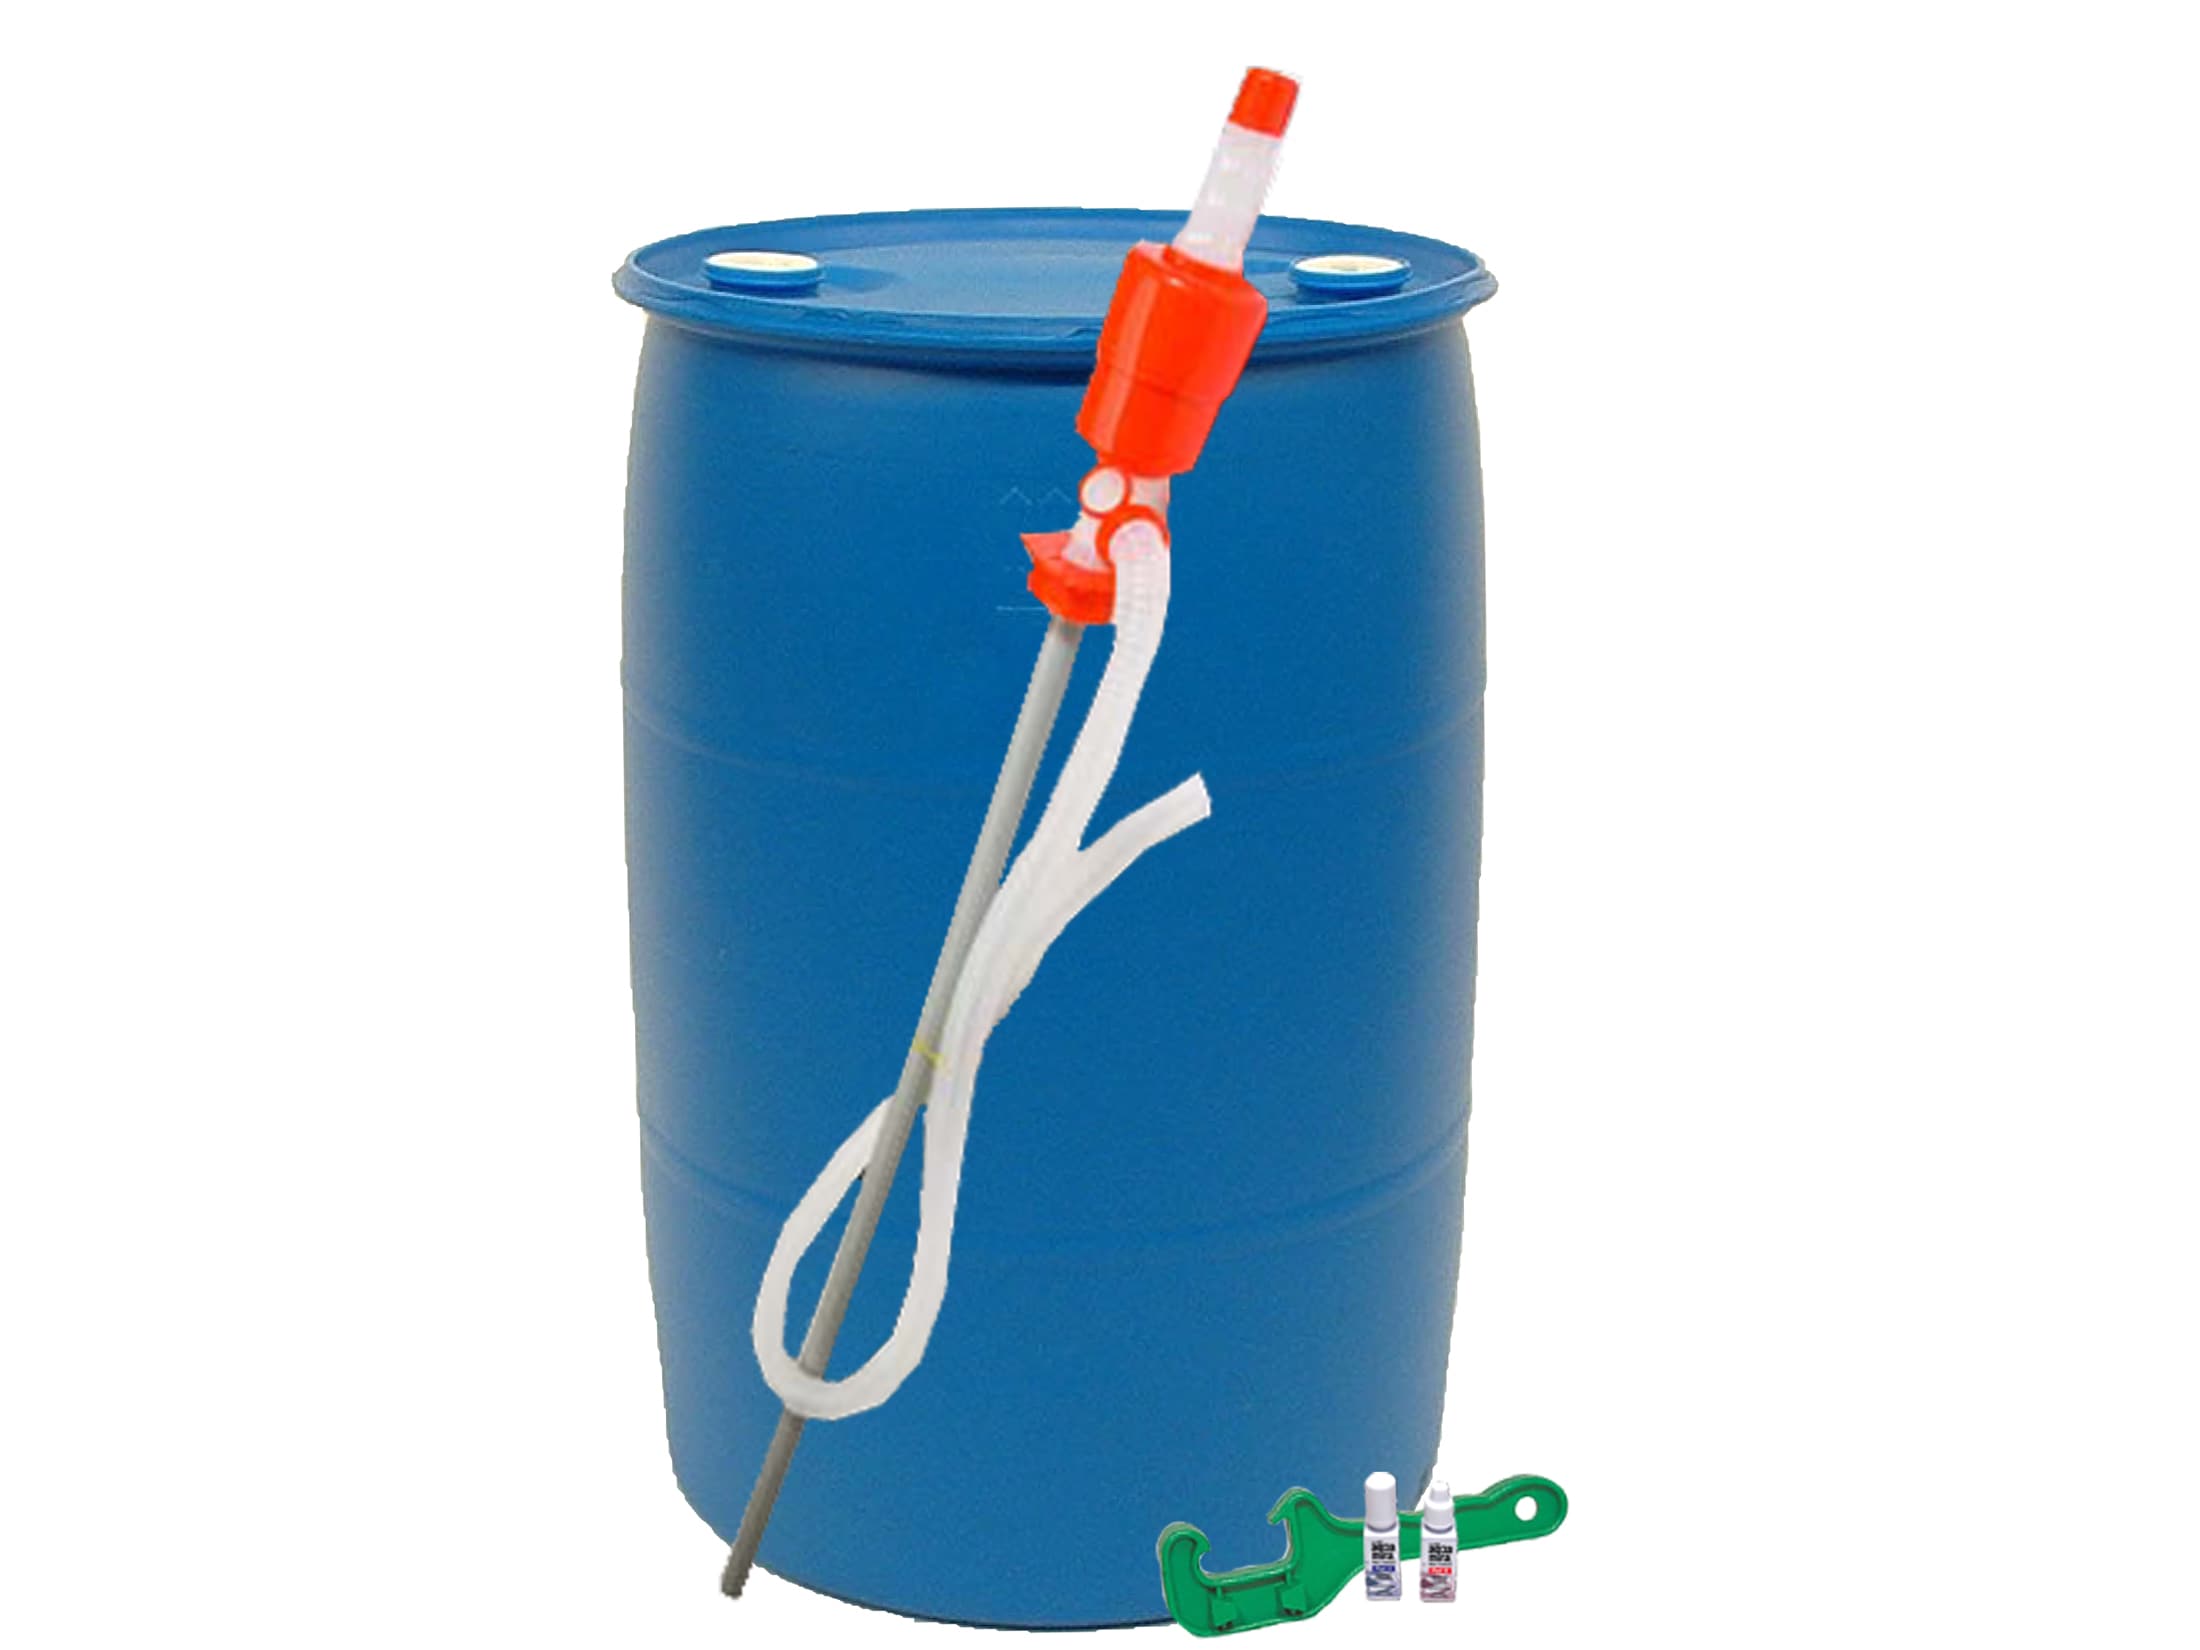 Water Filtration and Storage Barrel Kit Holds 55 Galloon Augason Farms 55 Gal 